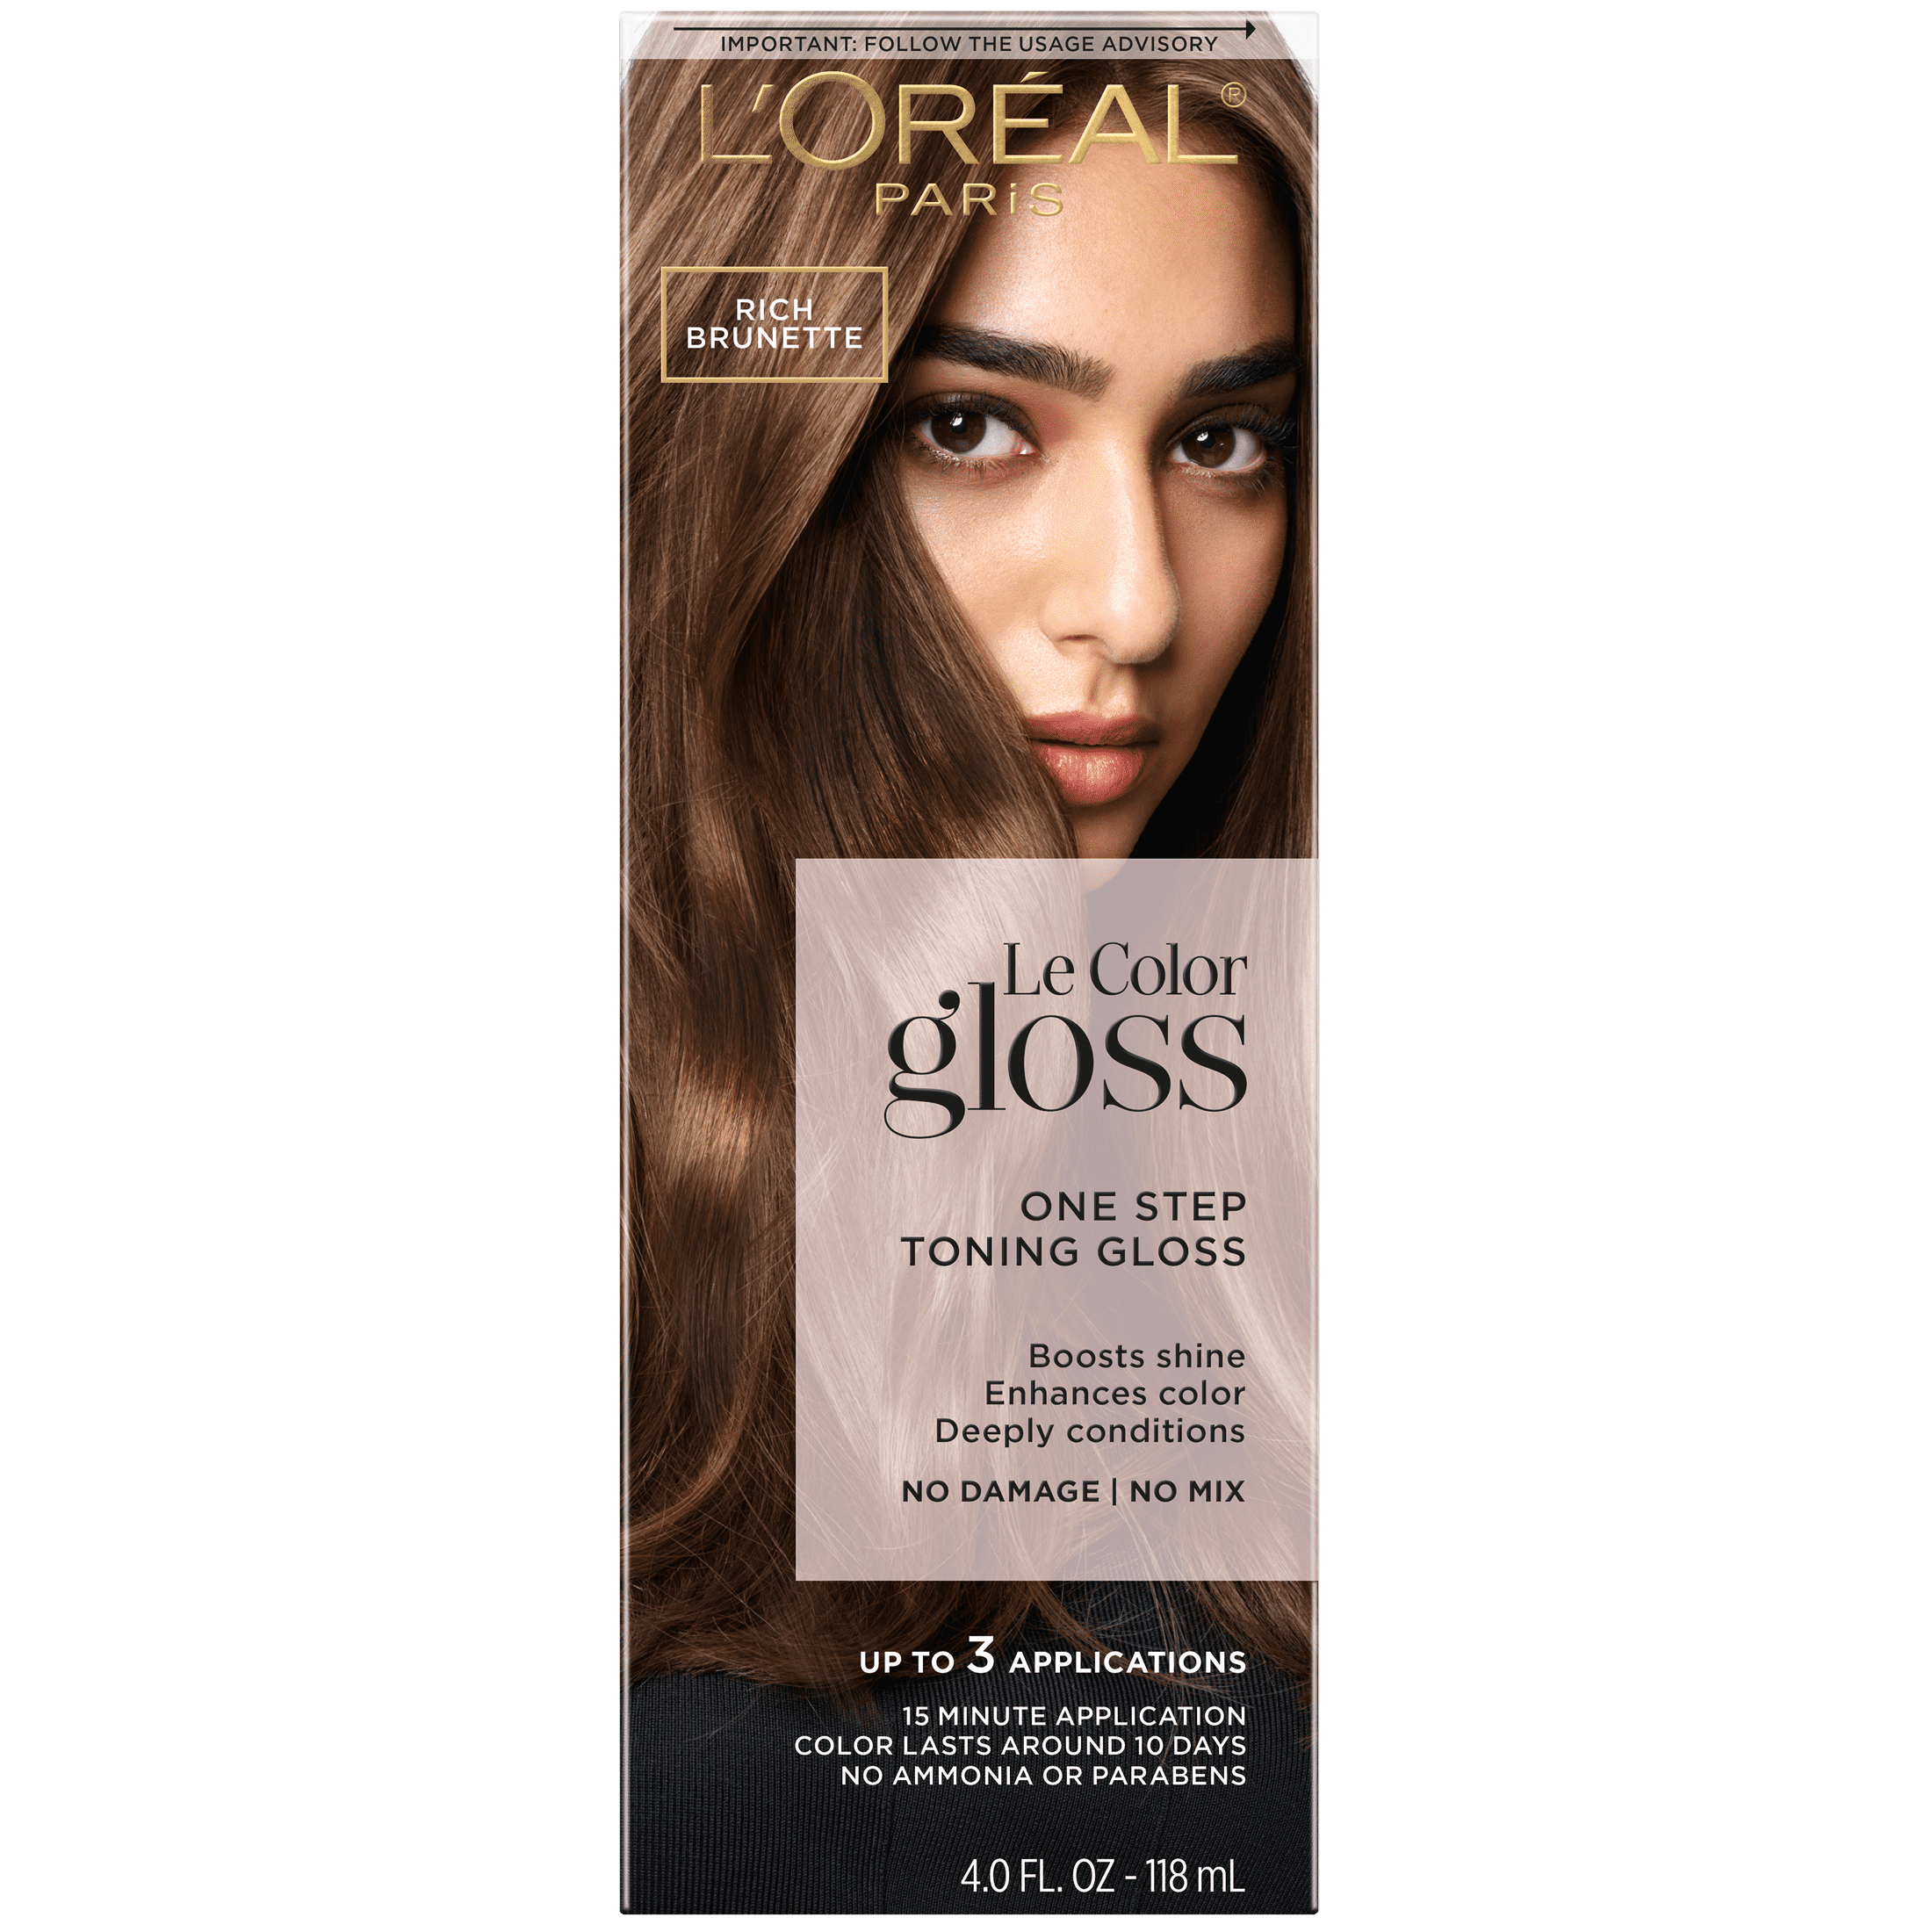 L'Oreal Paris Le Color Gloss One Step Toning Gloss Hair Color, 5 Rich ...